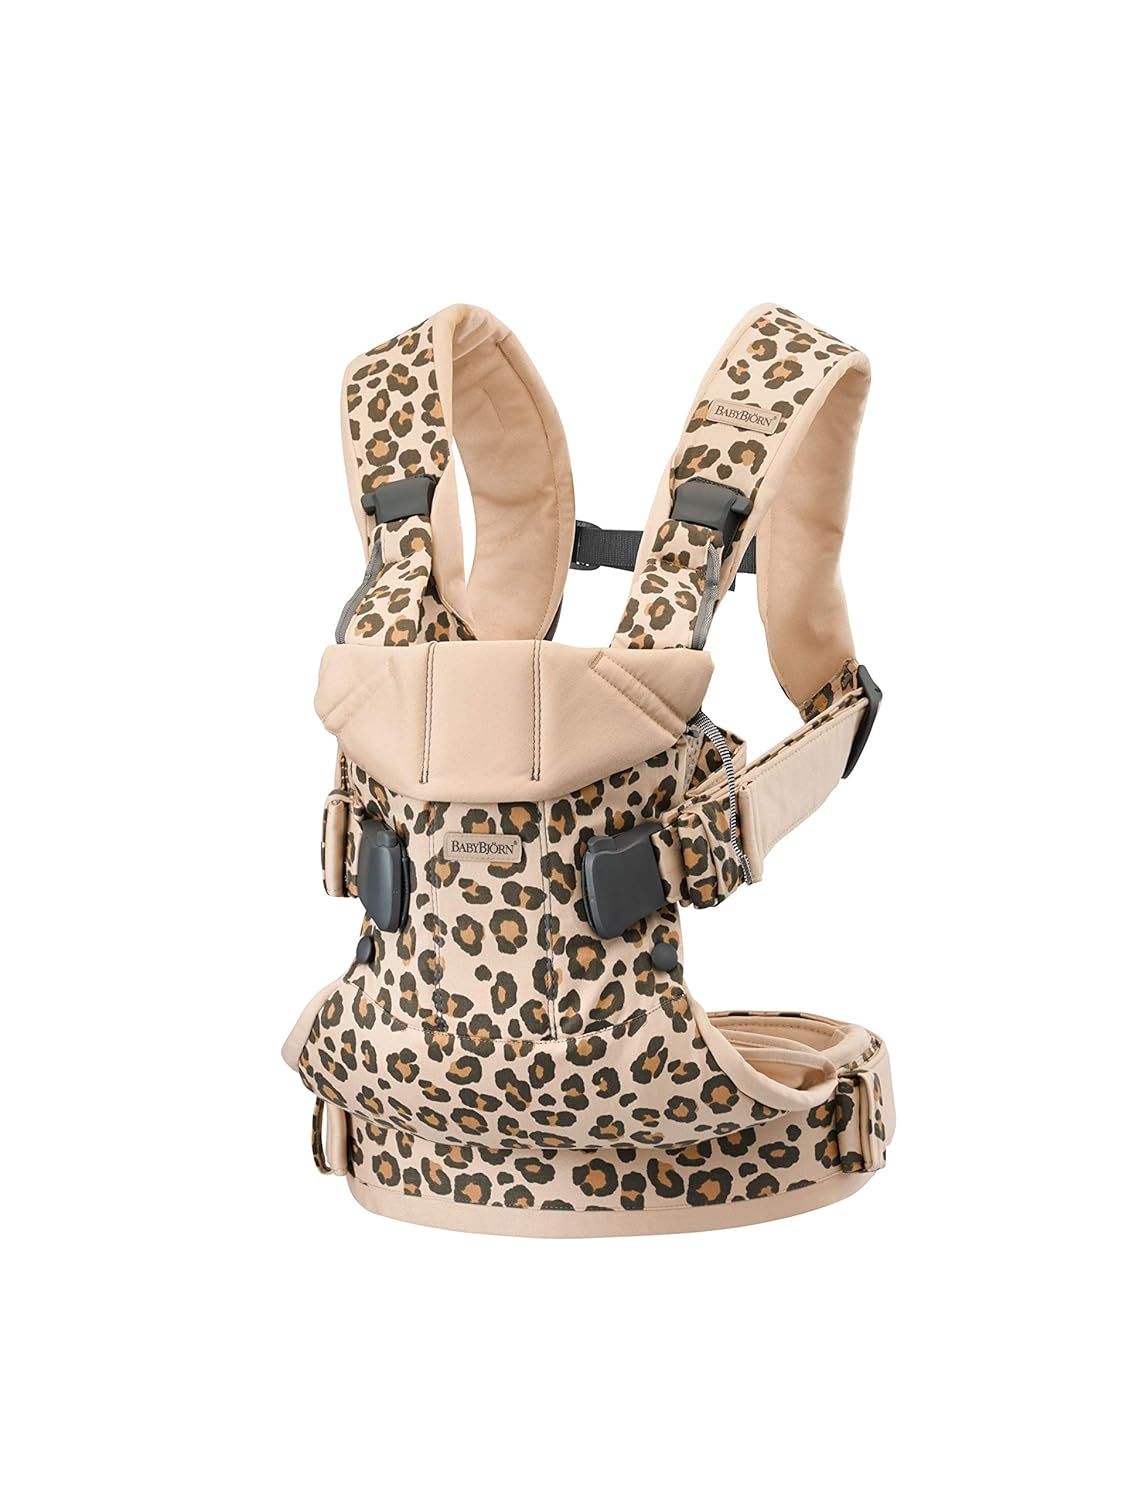 BabyBjörn Baby Carrier One, Cotton, Beige/Leopard, 1 Count (Pack of 1) | Amazon (US)